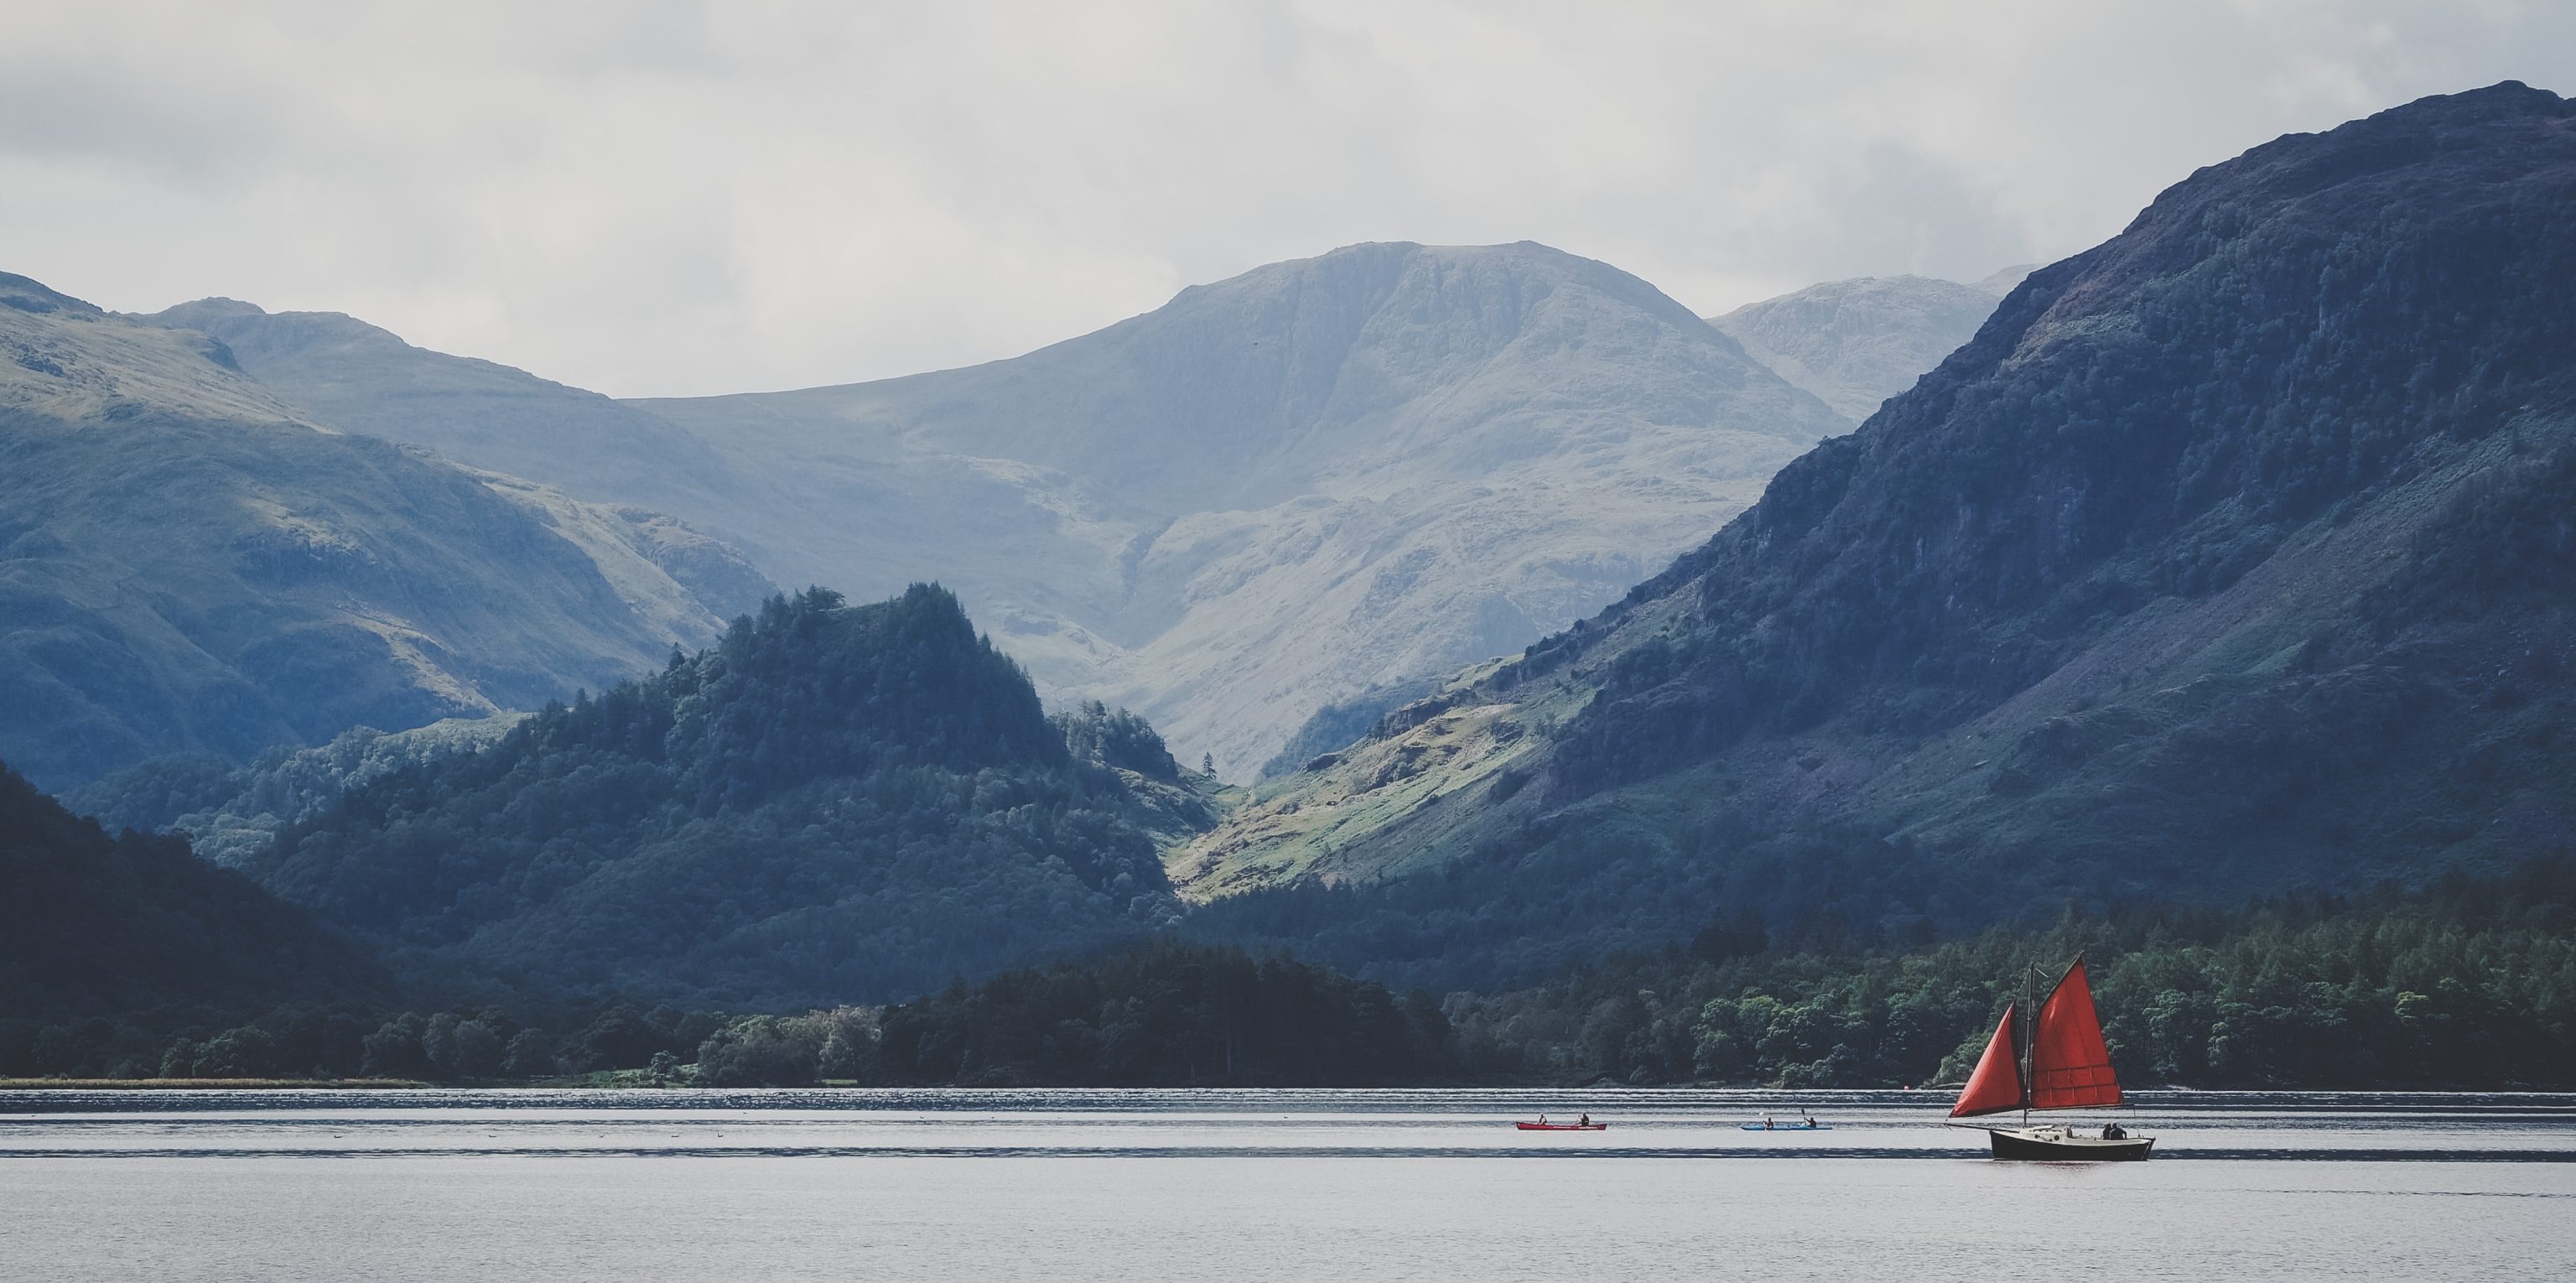 Reasons to buy a Holiday Home in the Lake District